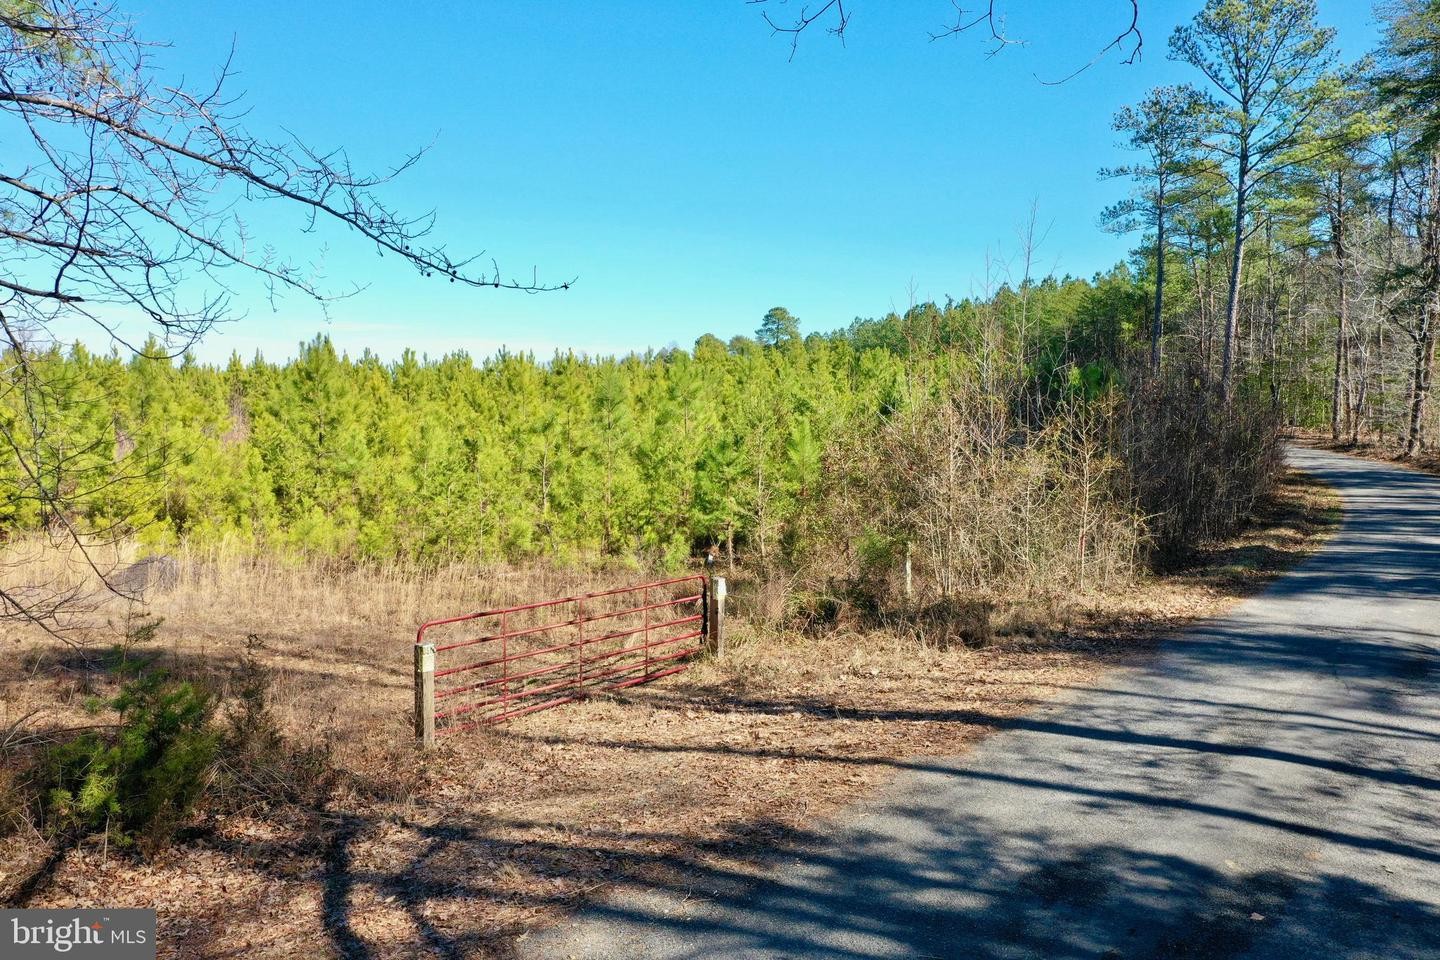 12. Tbd Ancient Acres Rd